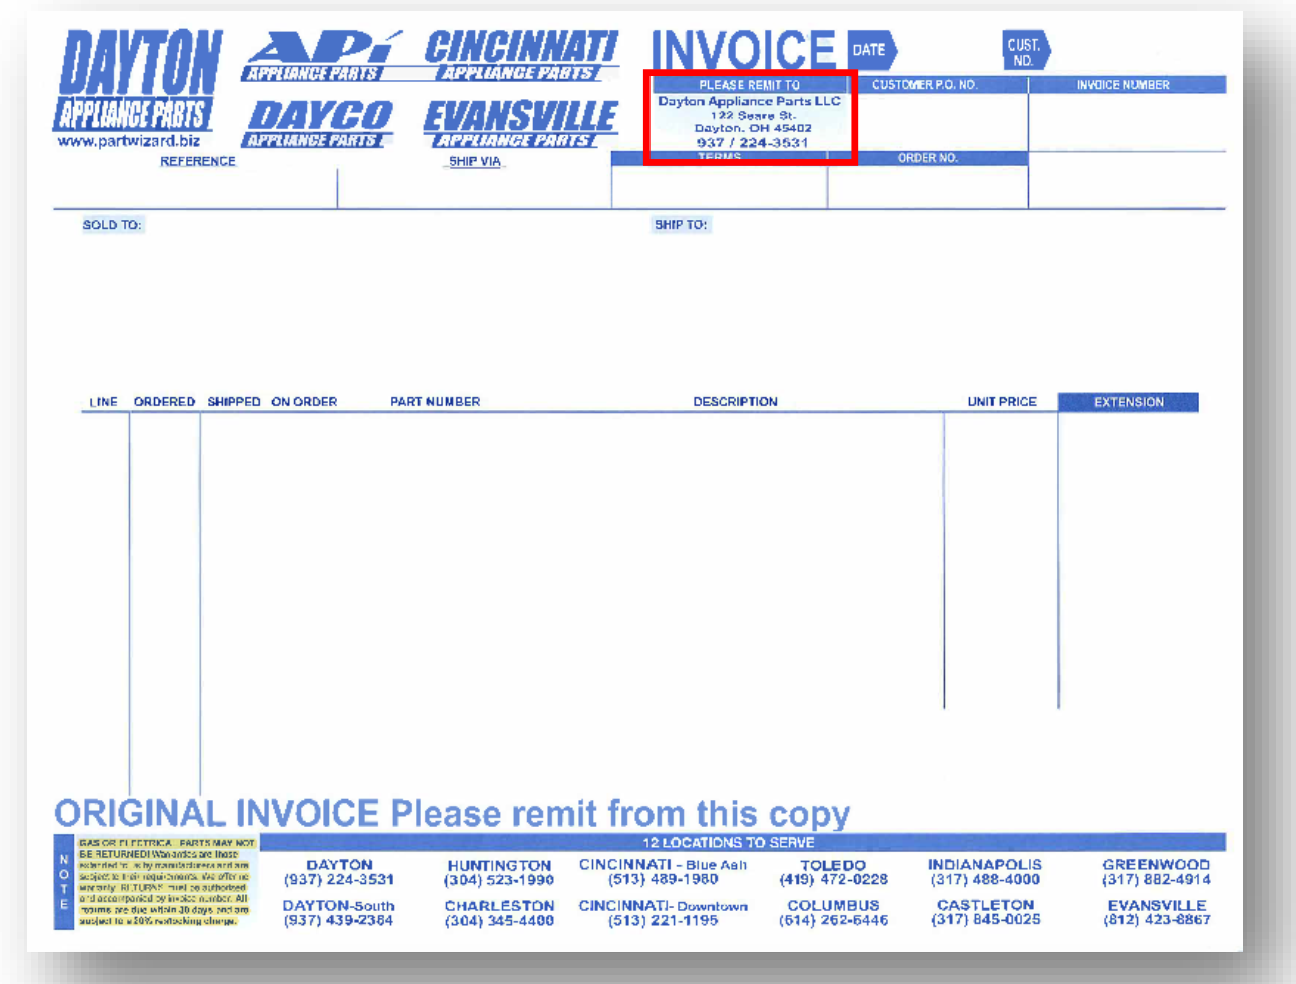 Image is showing an example of a Dayton invoice with remittance information